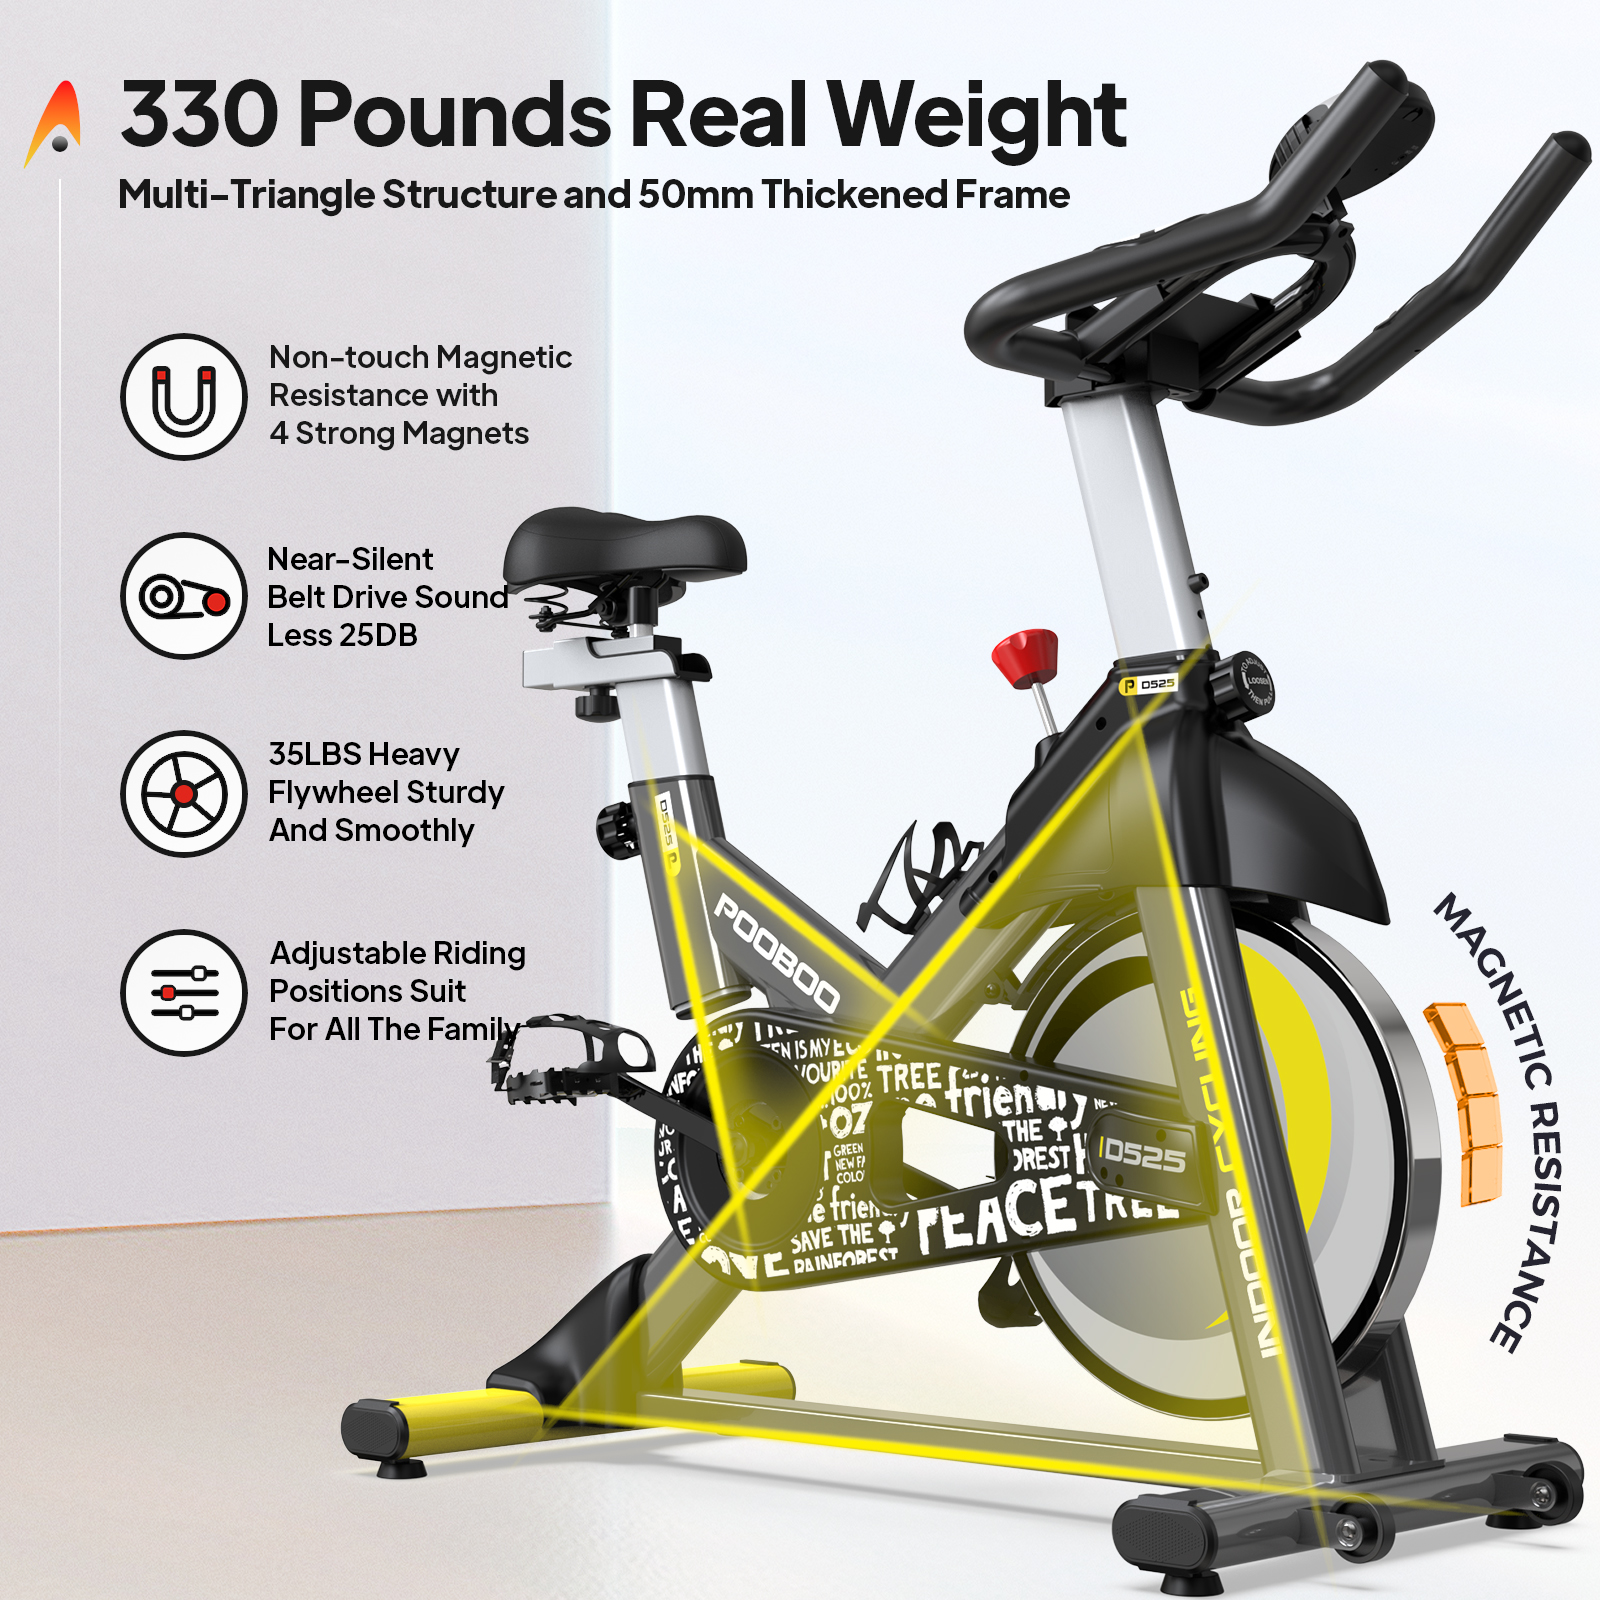 Pooboo Stationary Exercise bike Magnetic Resistance Cycling Bicycle with LCD Monitor for Indoor Cardio Workout 35 Lbs Flywheel Max Weight 330 Lbs - image 5 of 11